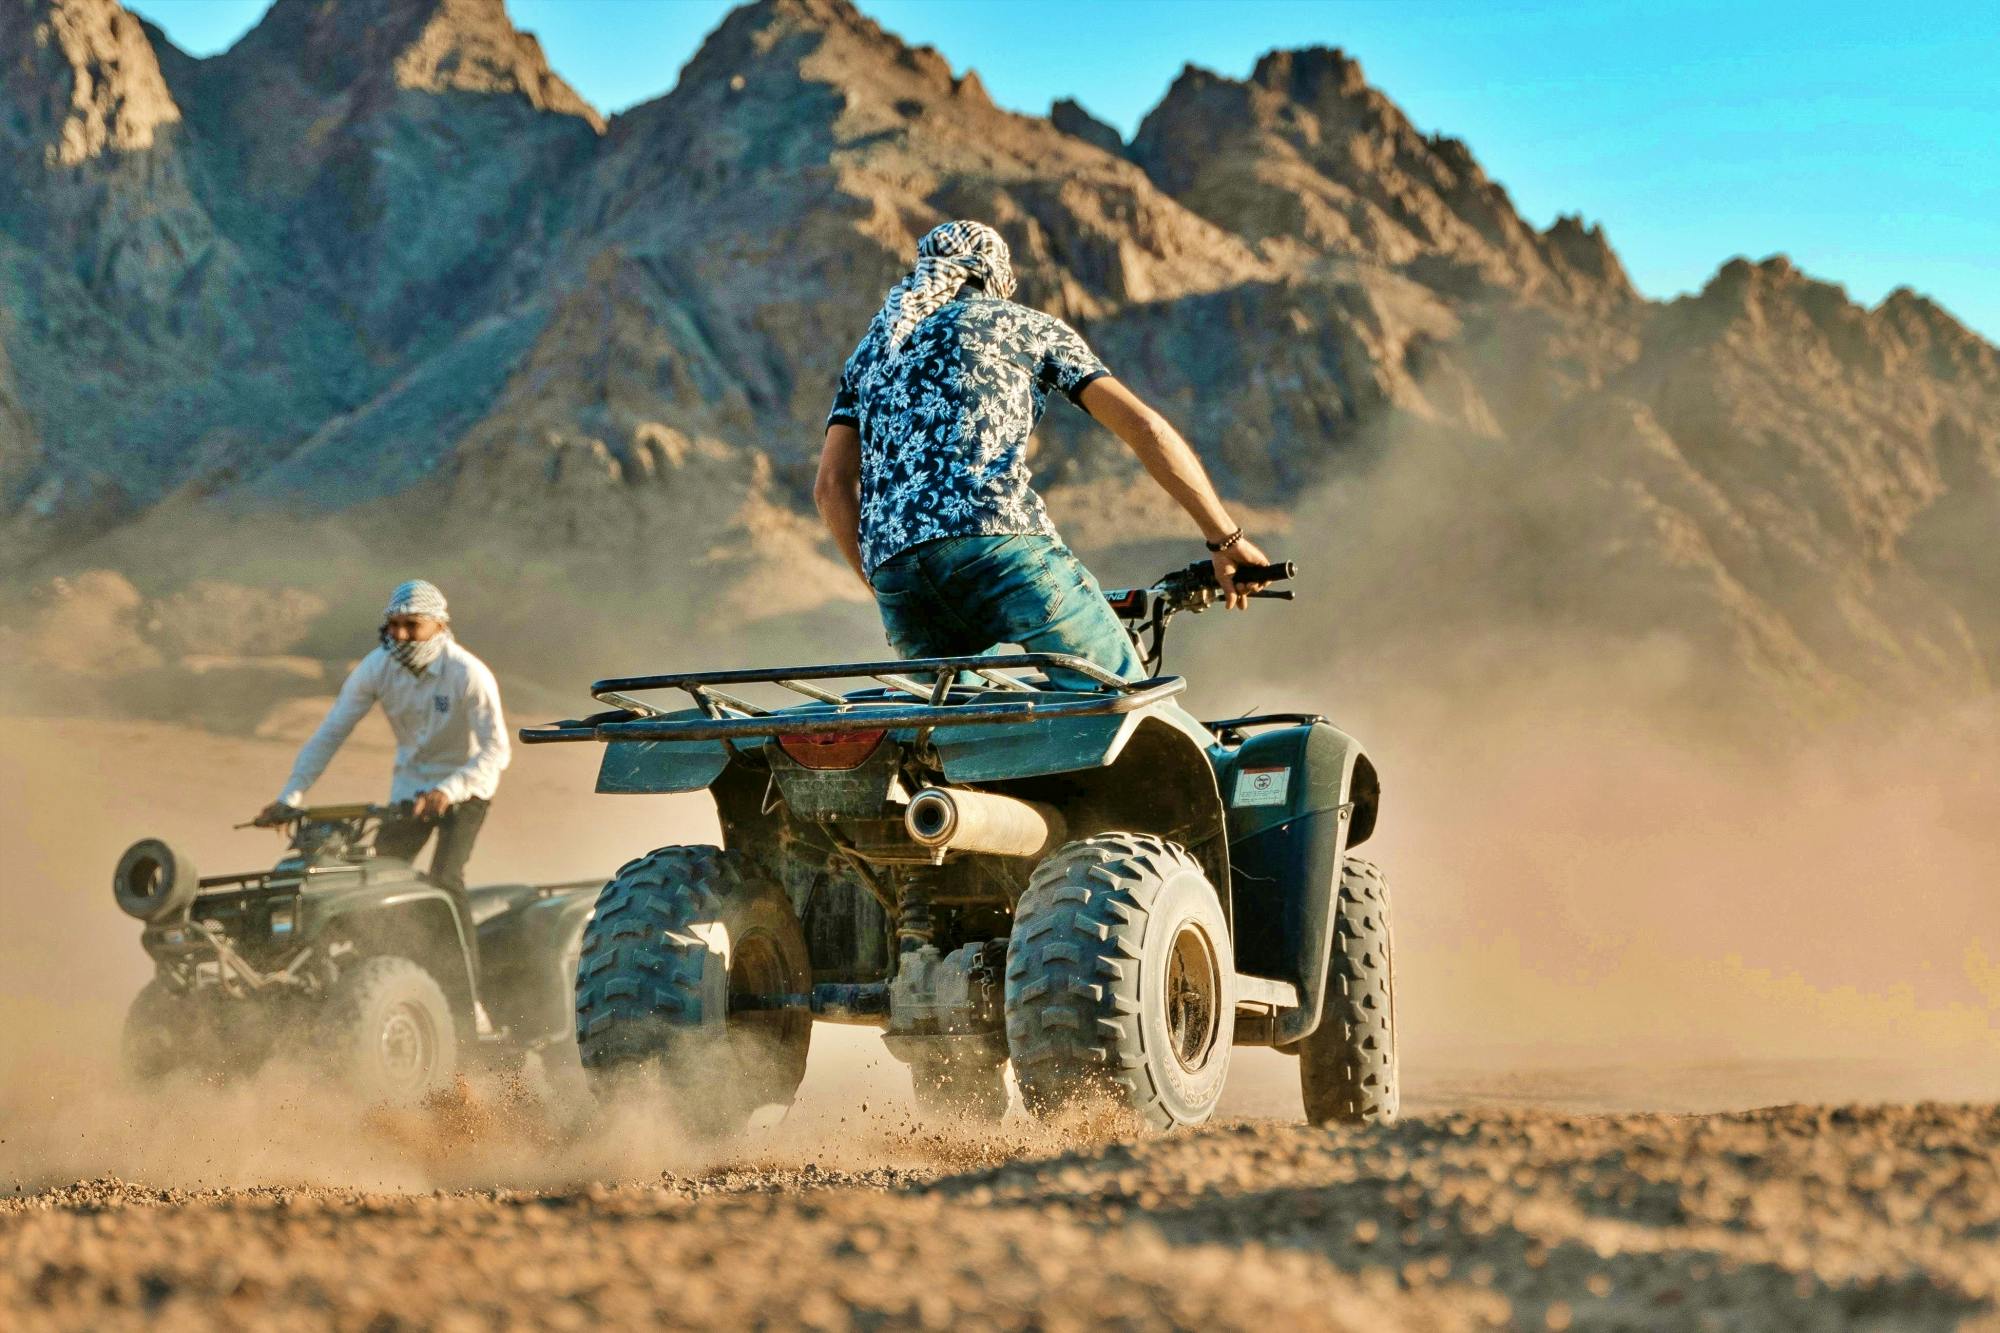 Quad experience in the Sahara with dinner from Sharm El Sheikh